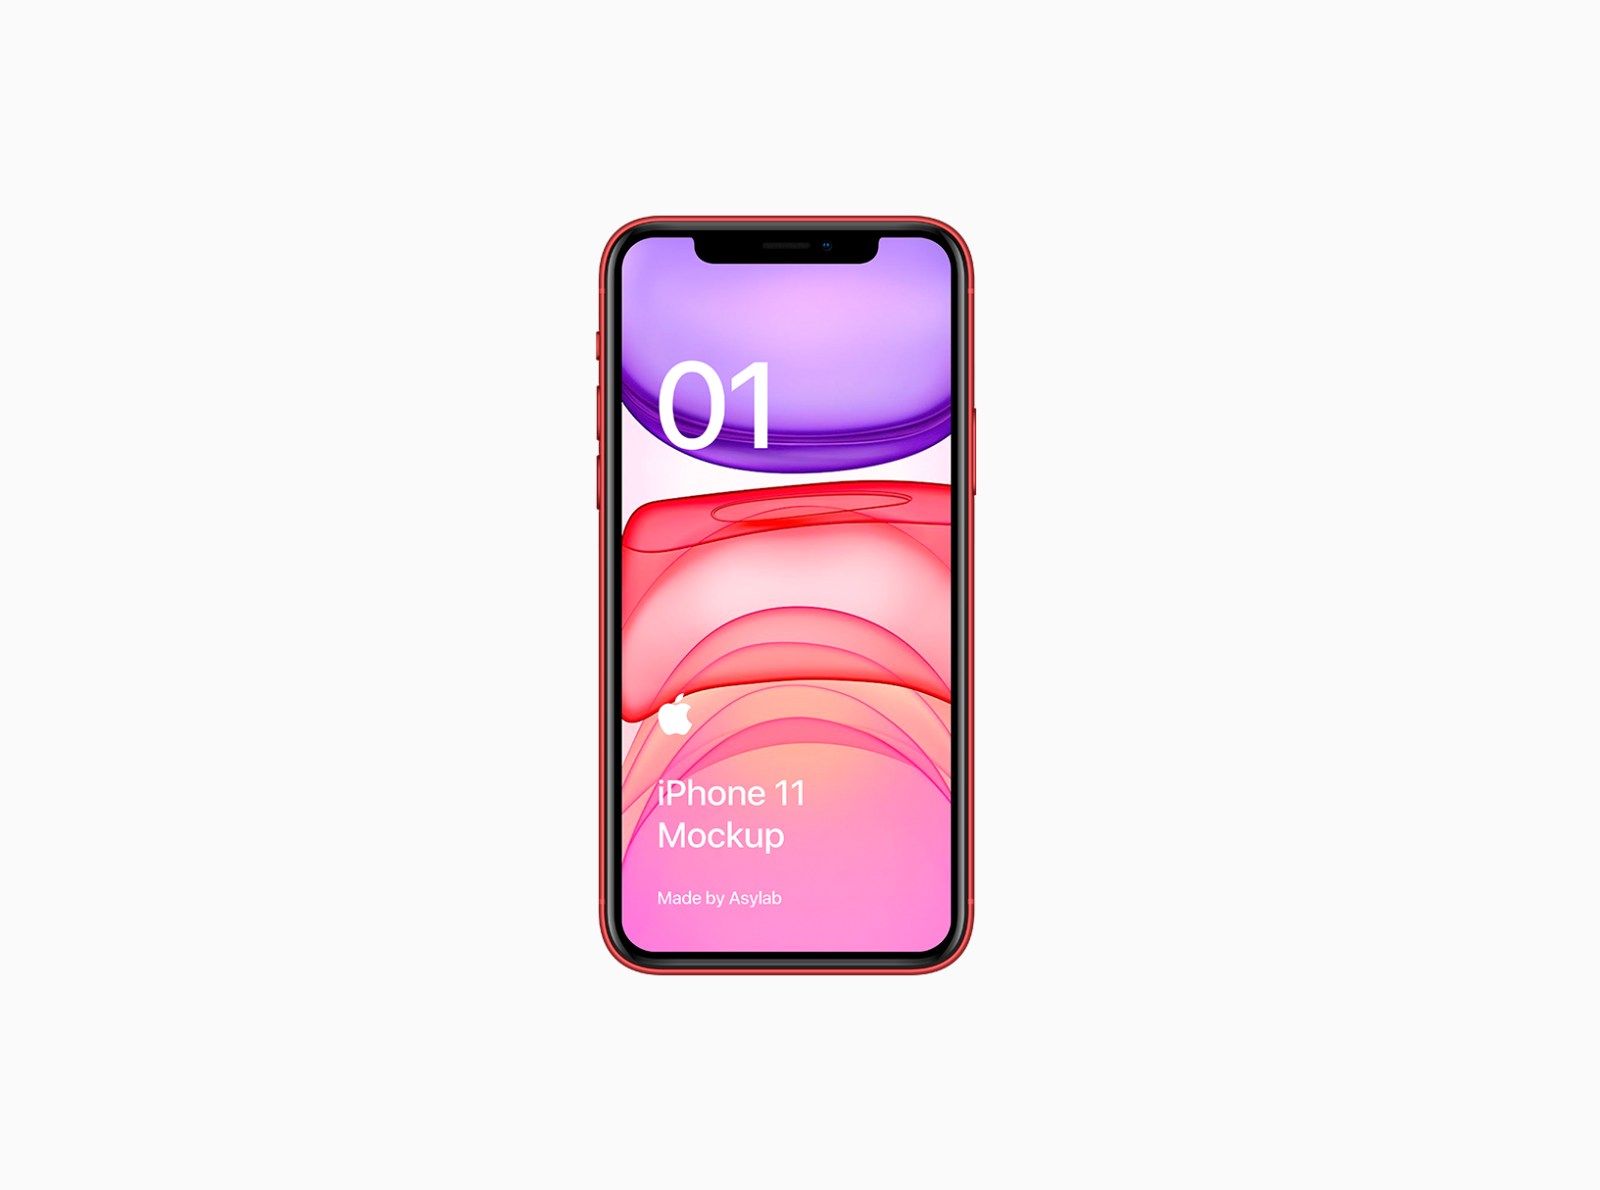 Download Freebie iPhone 11 Mockup - PSD by Asylab on Dribbble